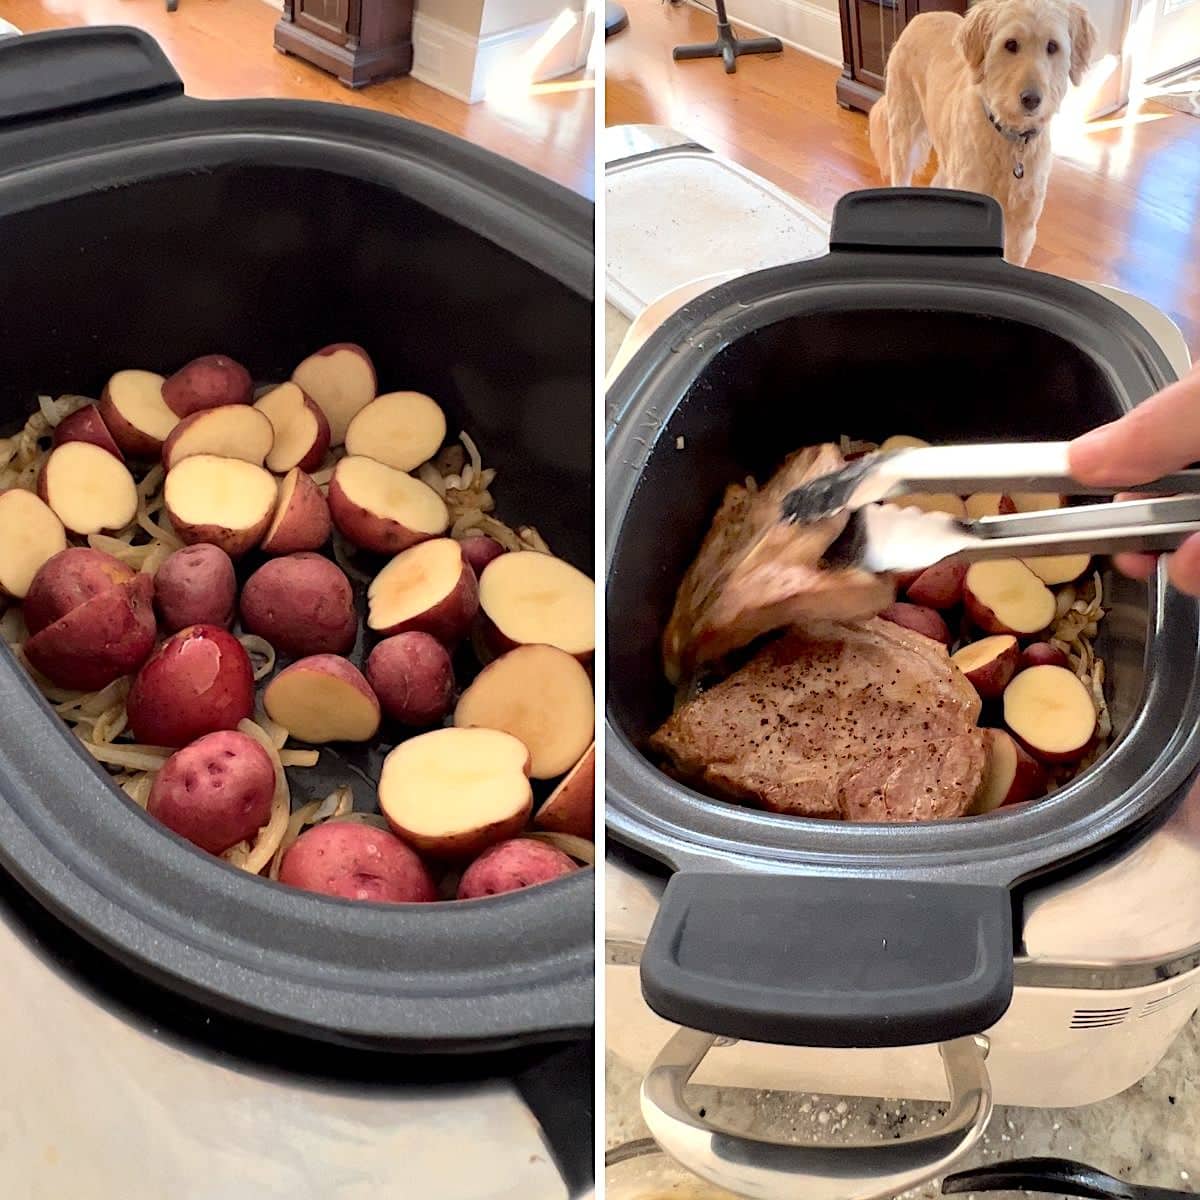 Adding the potatoes and pork chops to the crock pot.